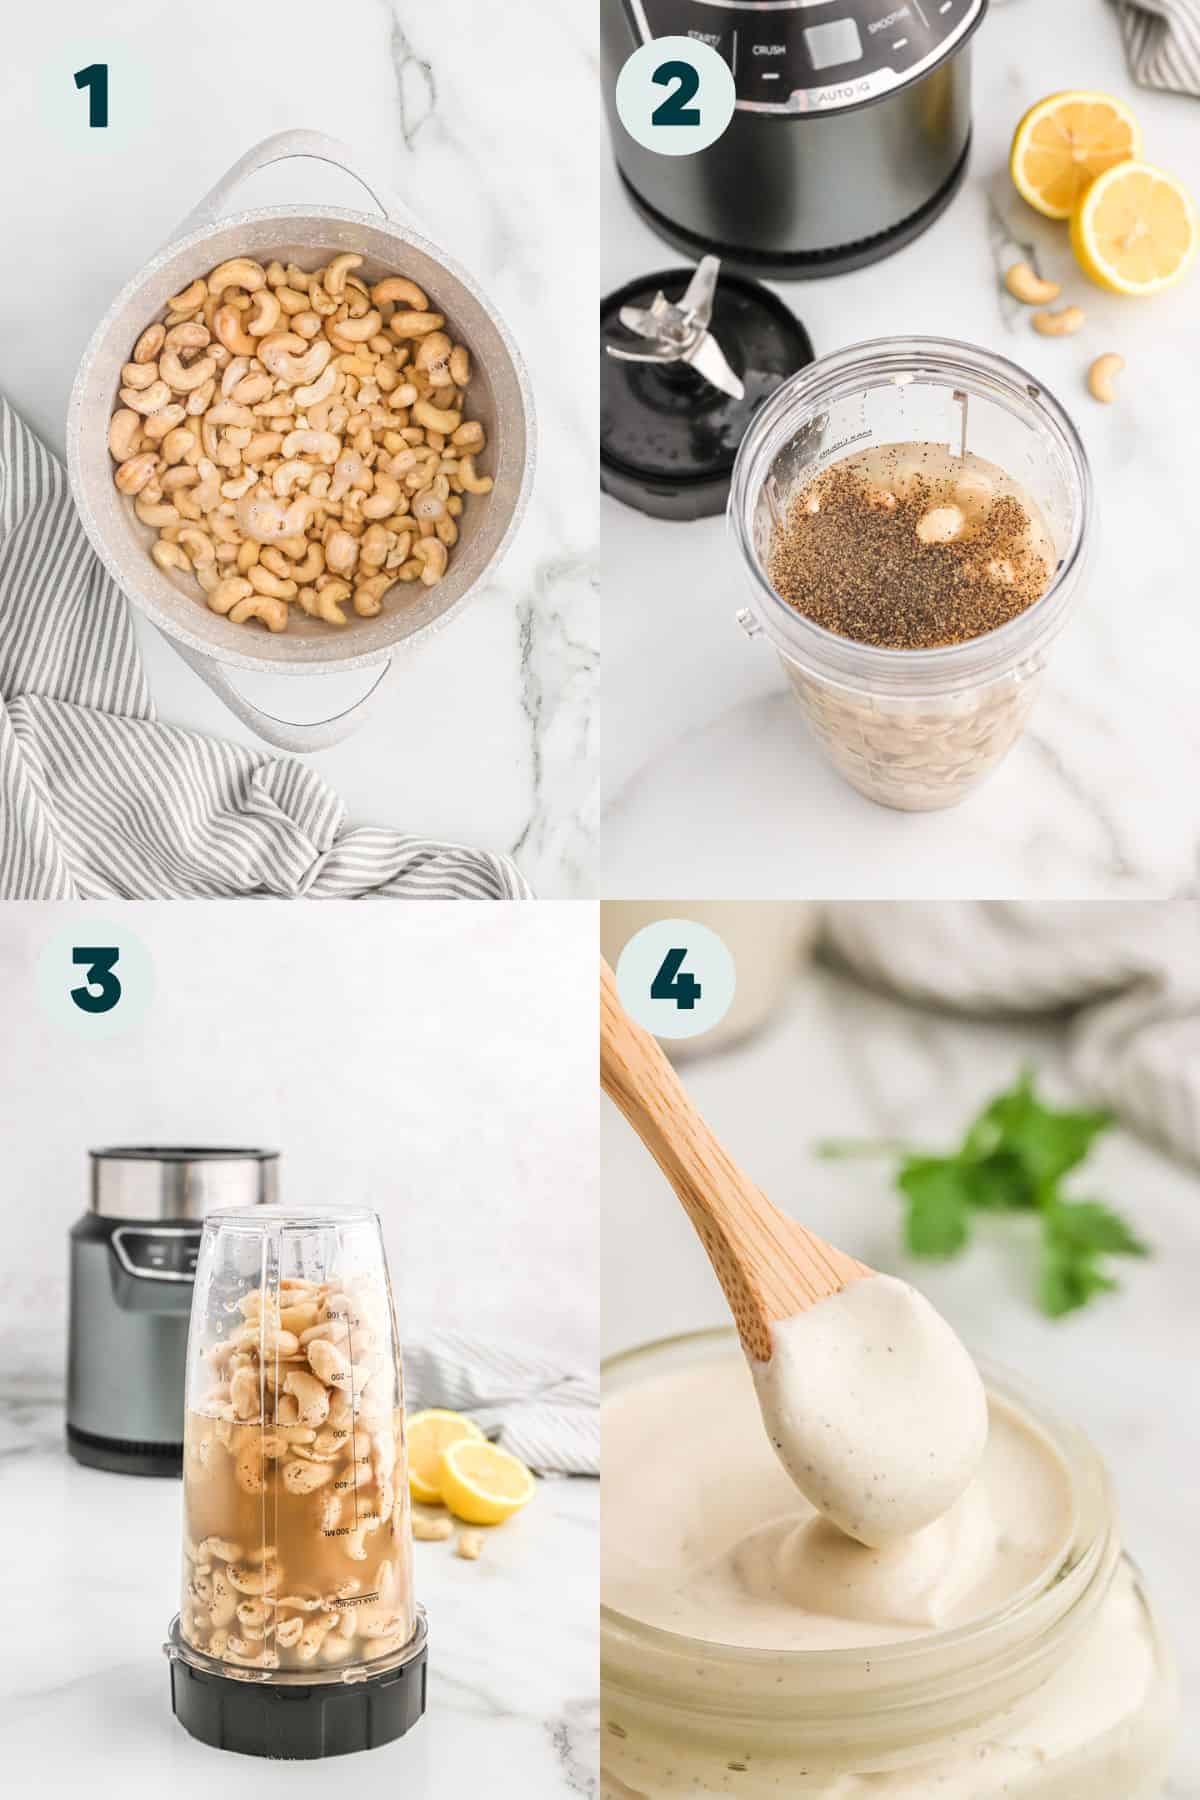 4 photo collage showing step by step process of making cashew sour cream.